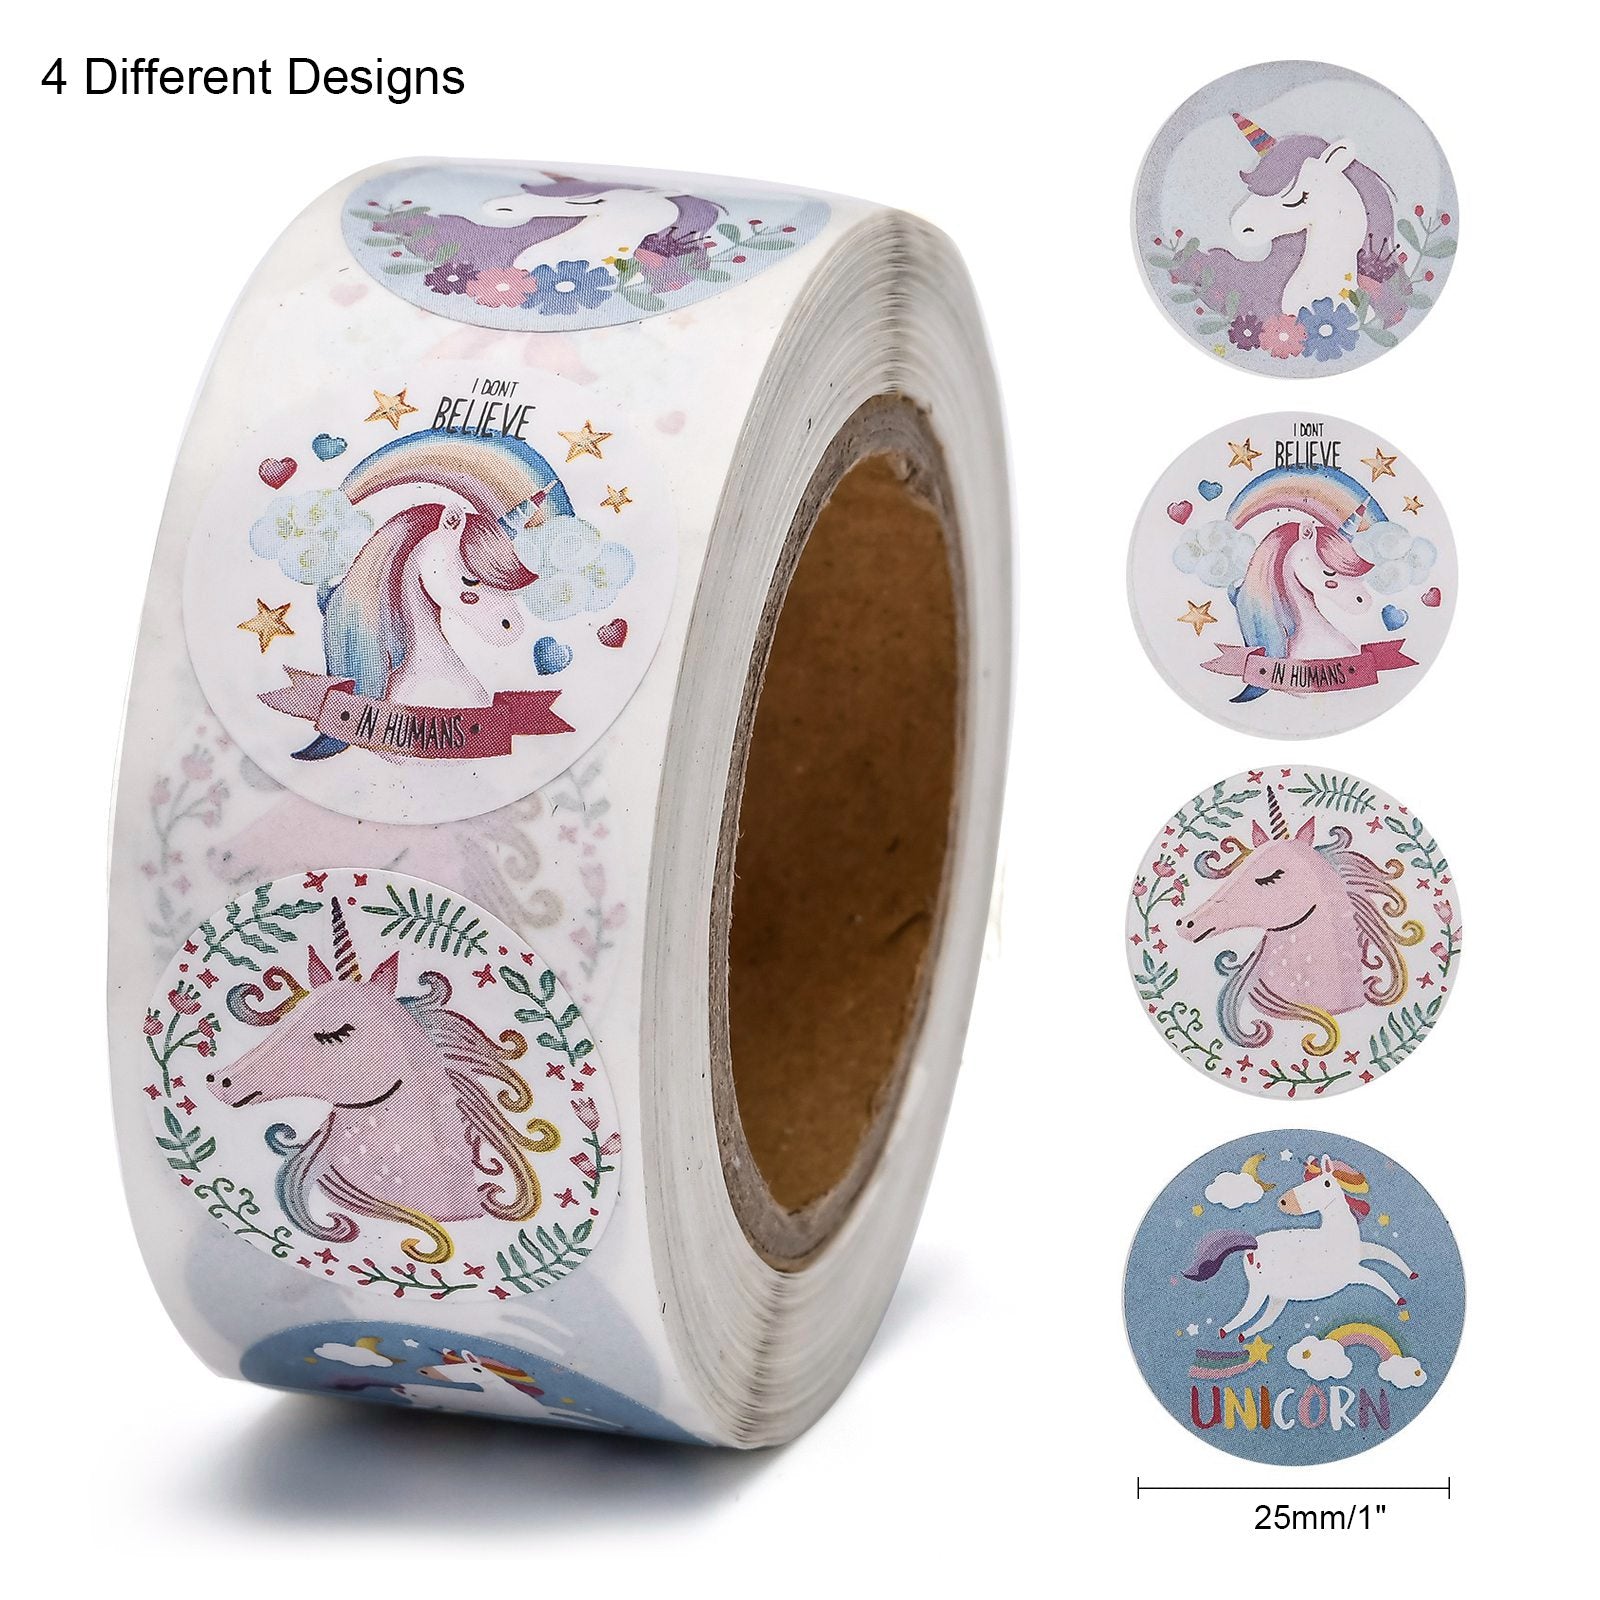 Globleland Self-Adhesive Paper Stickers, Gift Tag, for Party, Decorative Presents, Round, Colorful, Unicorn Pattern, 25mm, 500pcs/roll